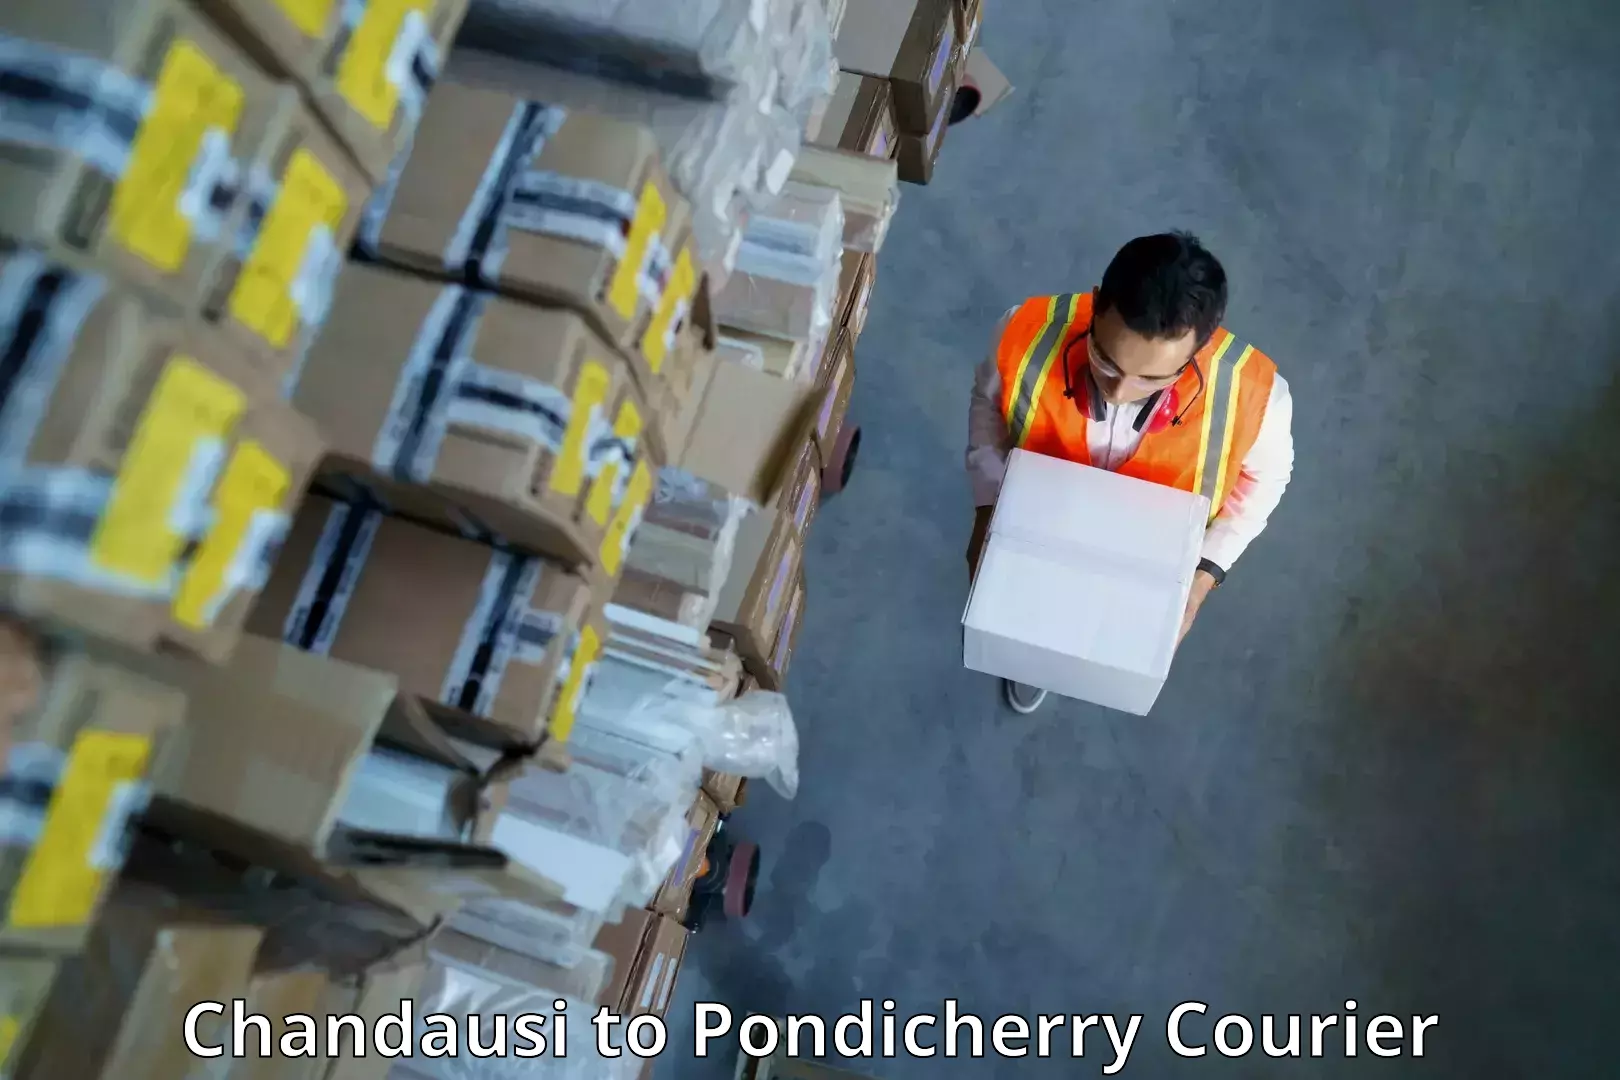 Courier service partnerships Chandausi to Pondicherry